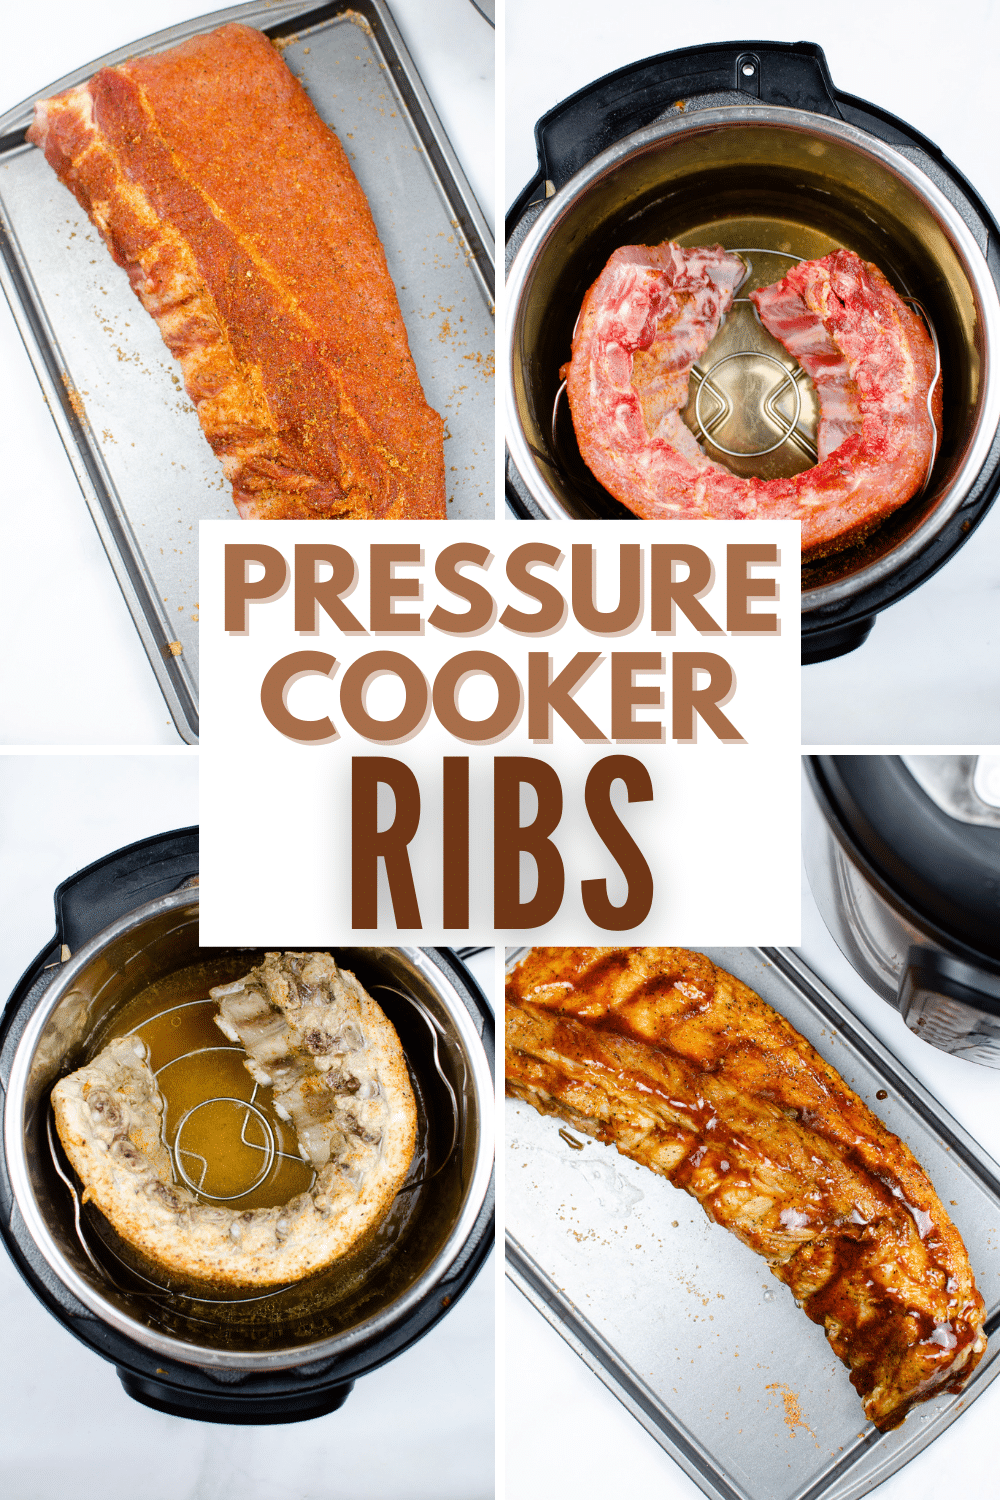 Pressure Cooker Ribs are falling-off-the-bone delicious, and they’re so easy to make! You’ll never go back to slow cooker or grilled ribs! #instantpot #pressurecooker #ribs #pressurecookerribs via @wondermomwannab